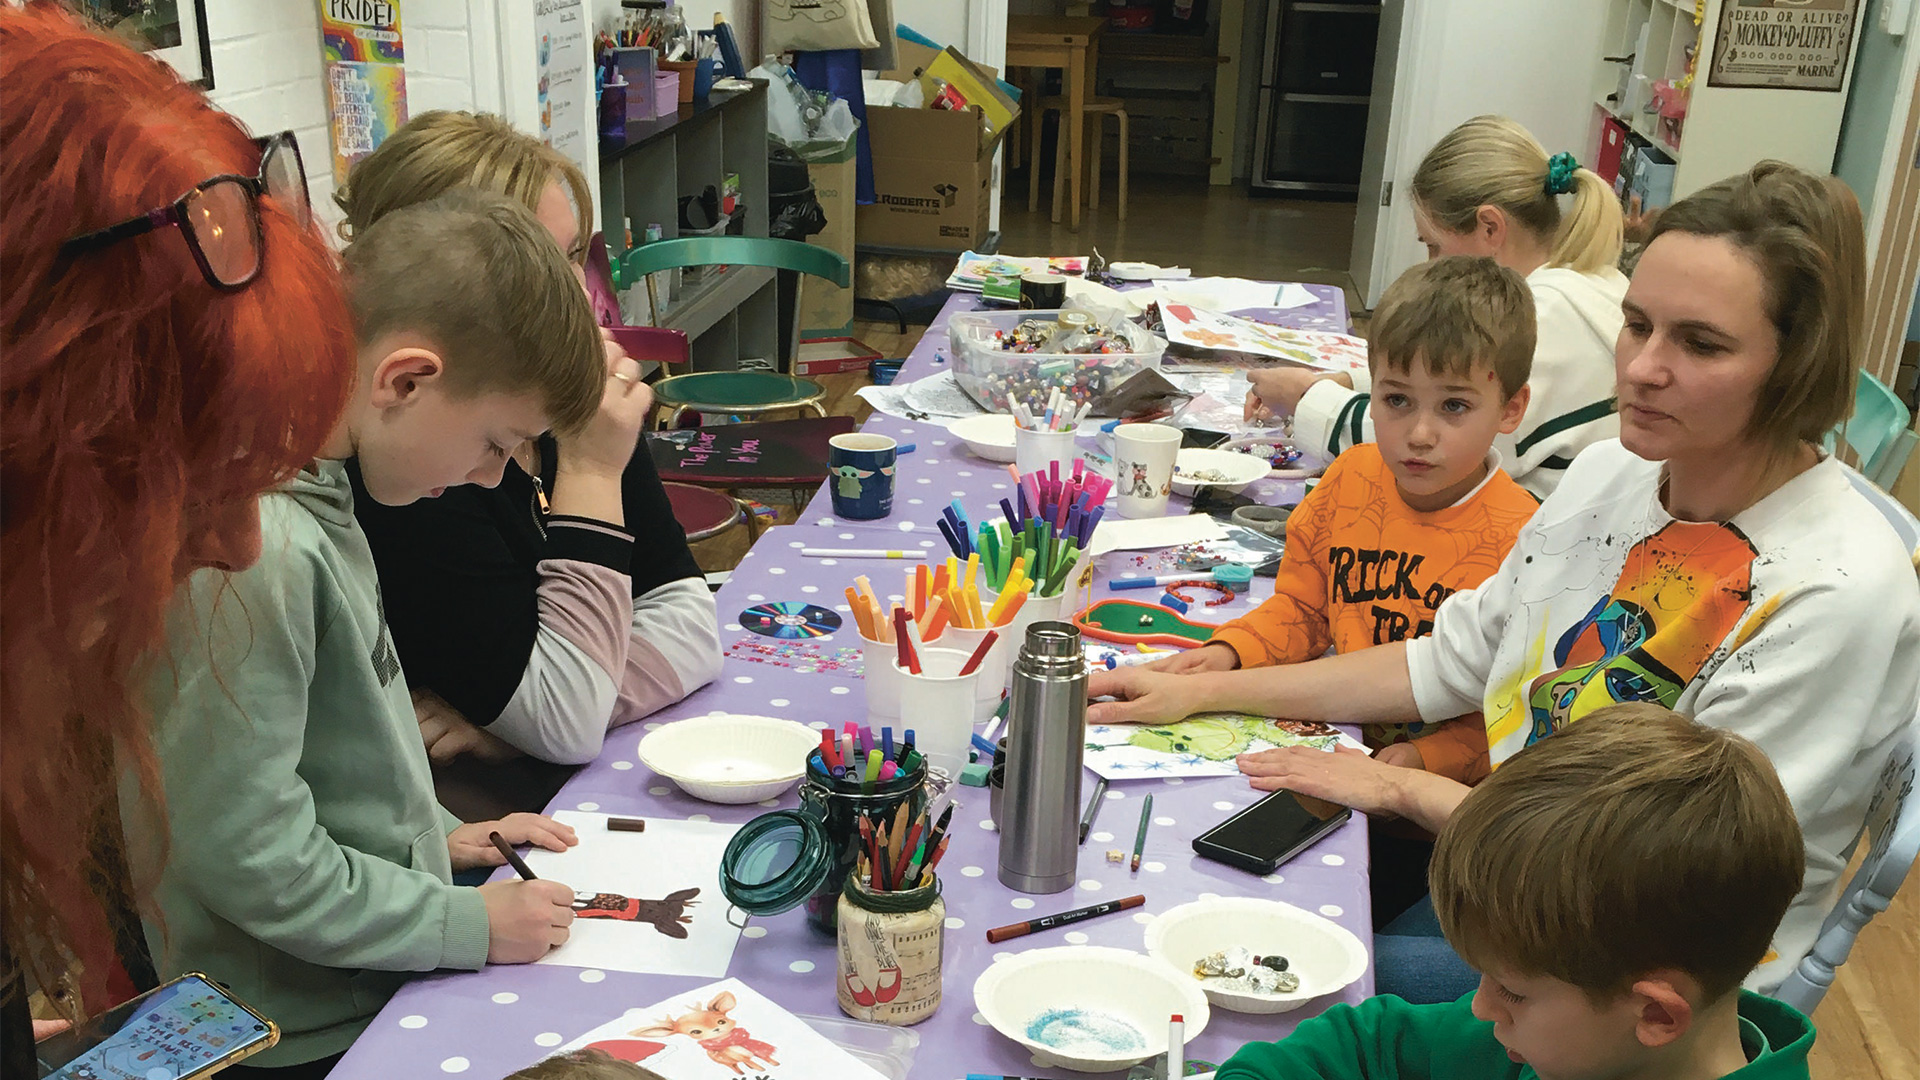 Children painting around a table